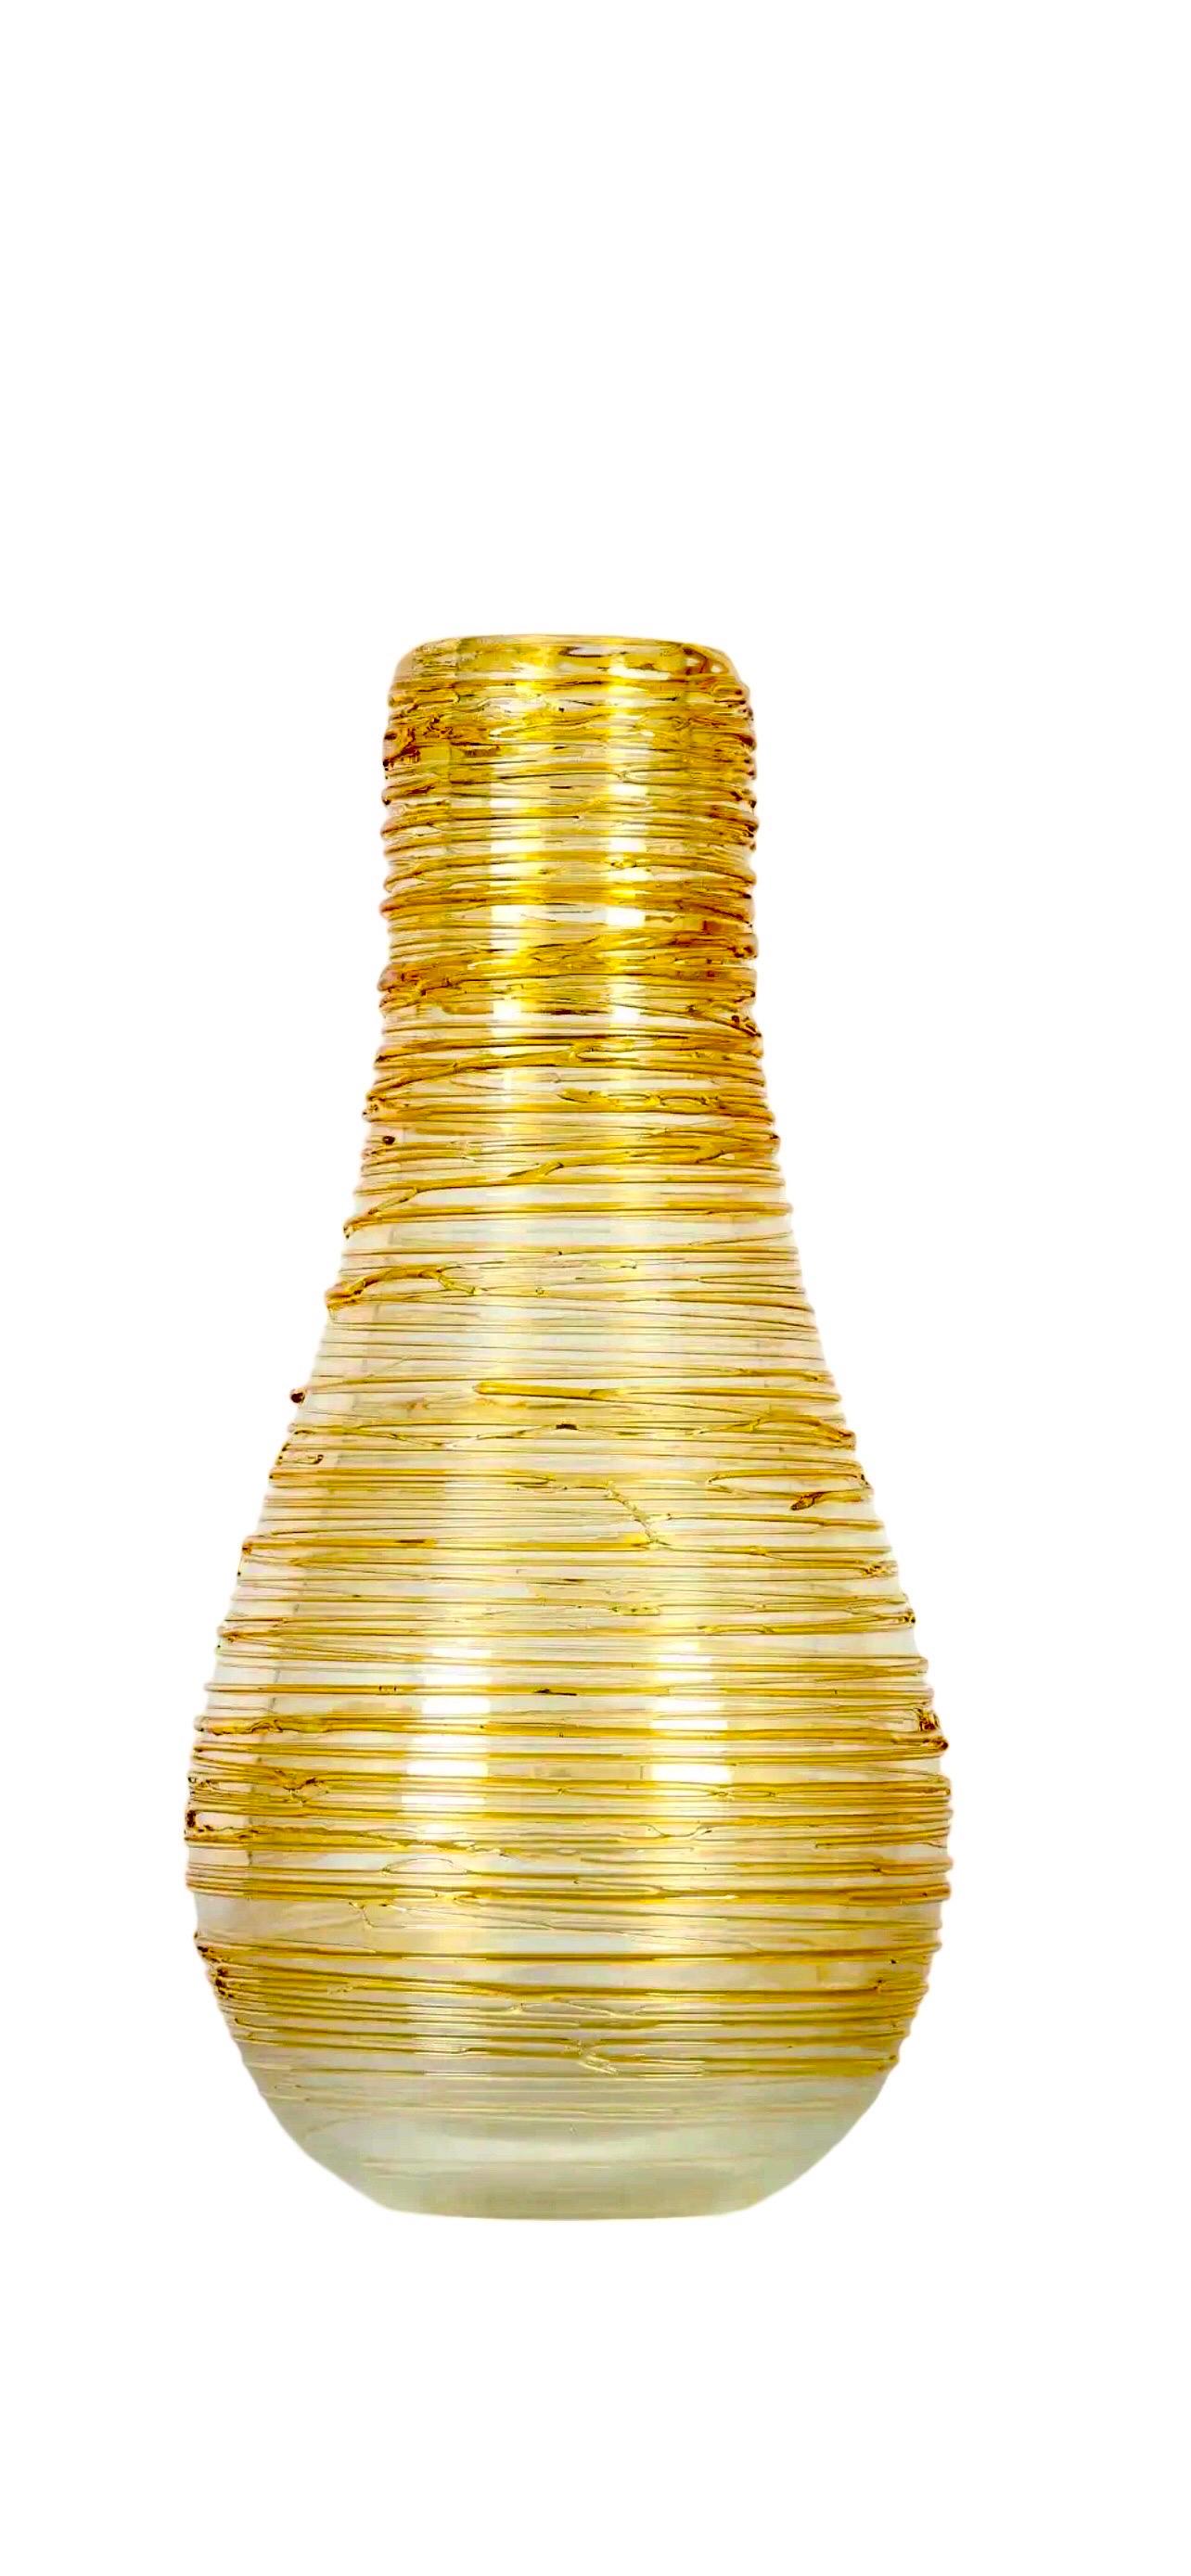 Sergio Constantini Abstract Sculpture - Large Murano Glass Abstract Blown Glass Sculpture Gold, Clear Constantini Vase